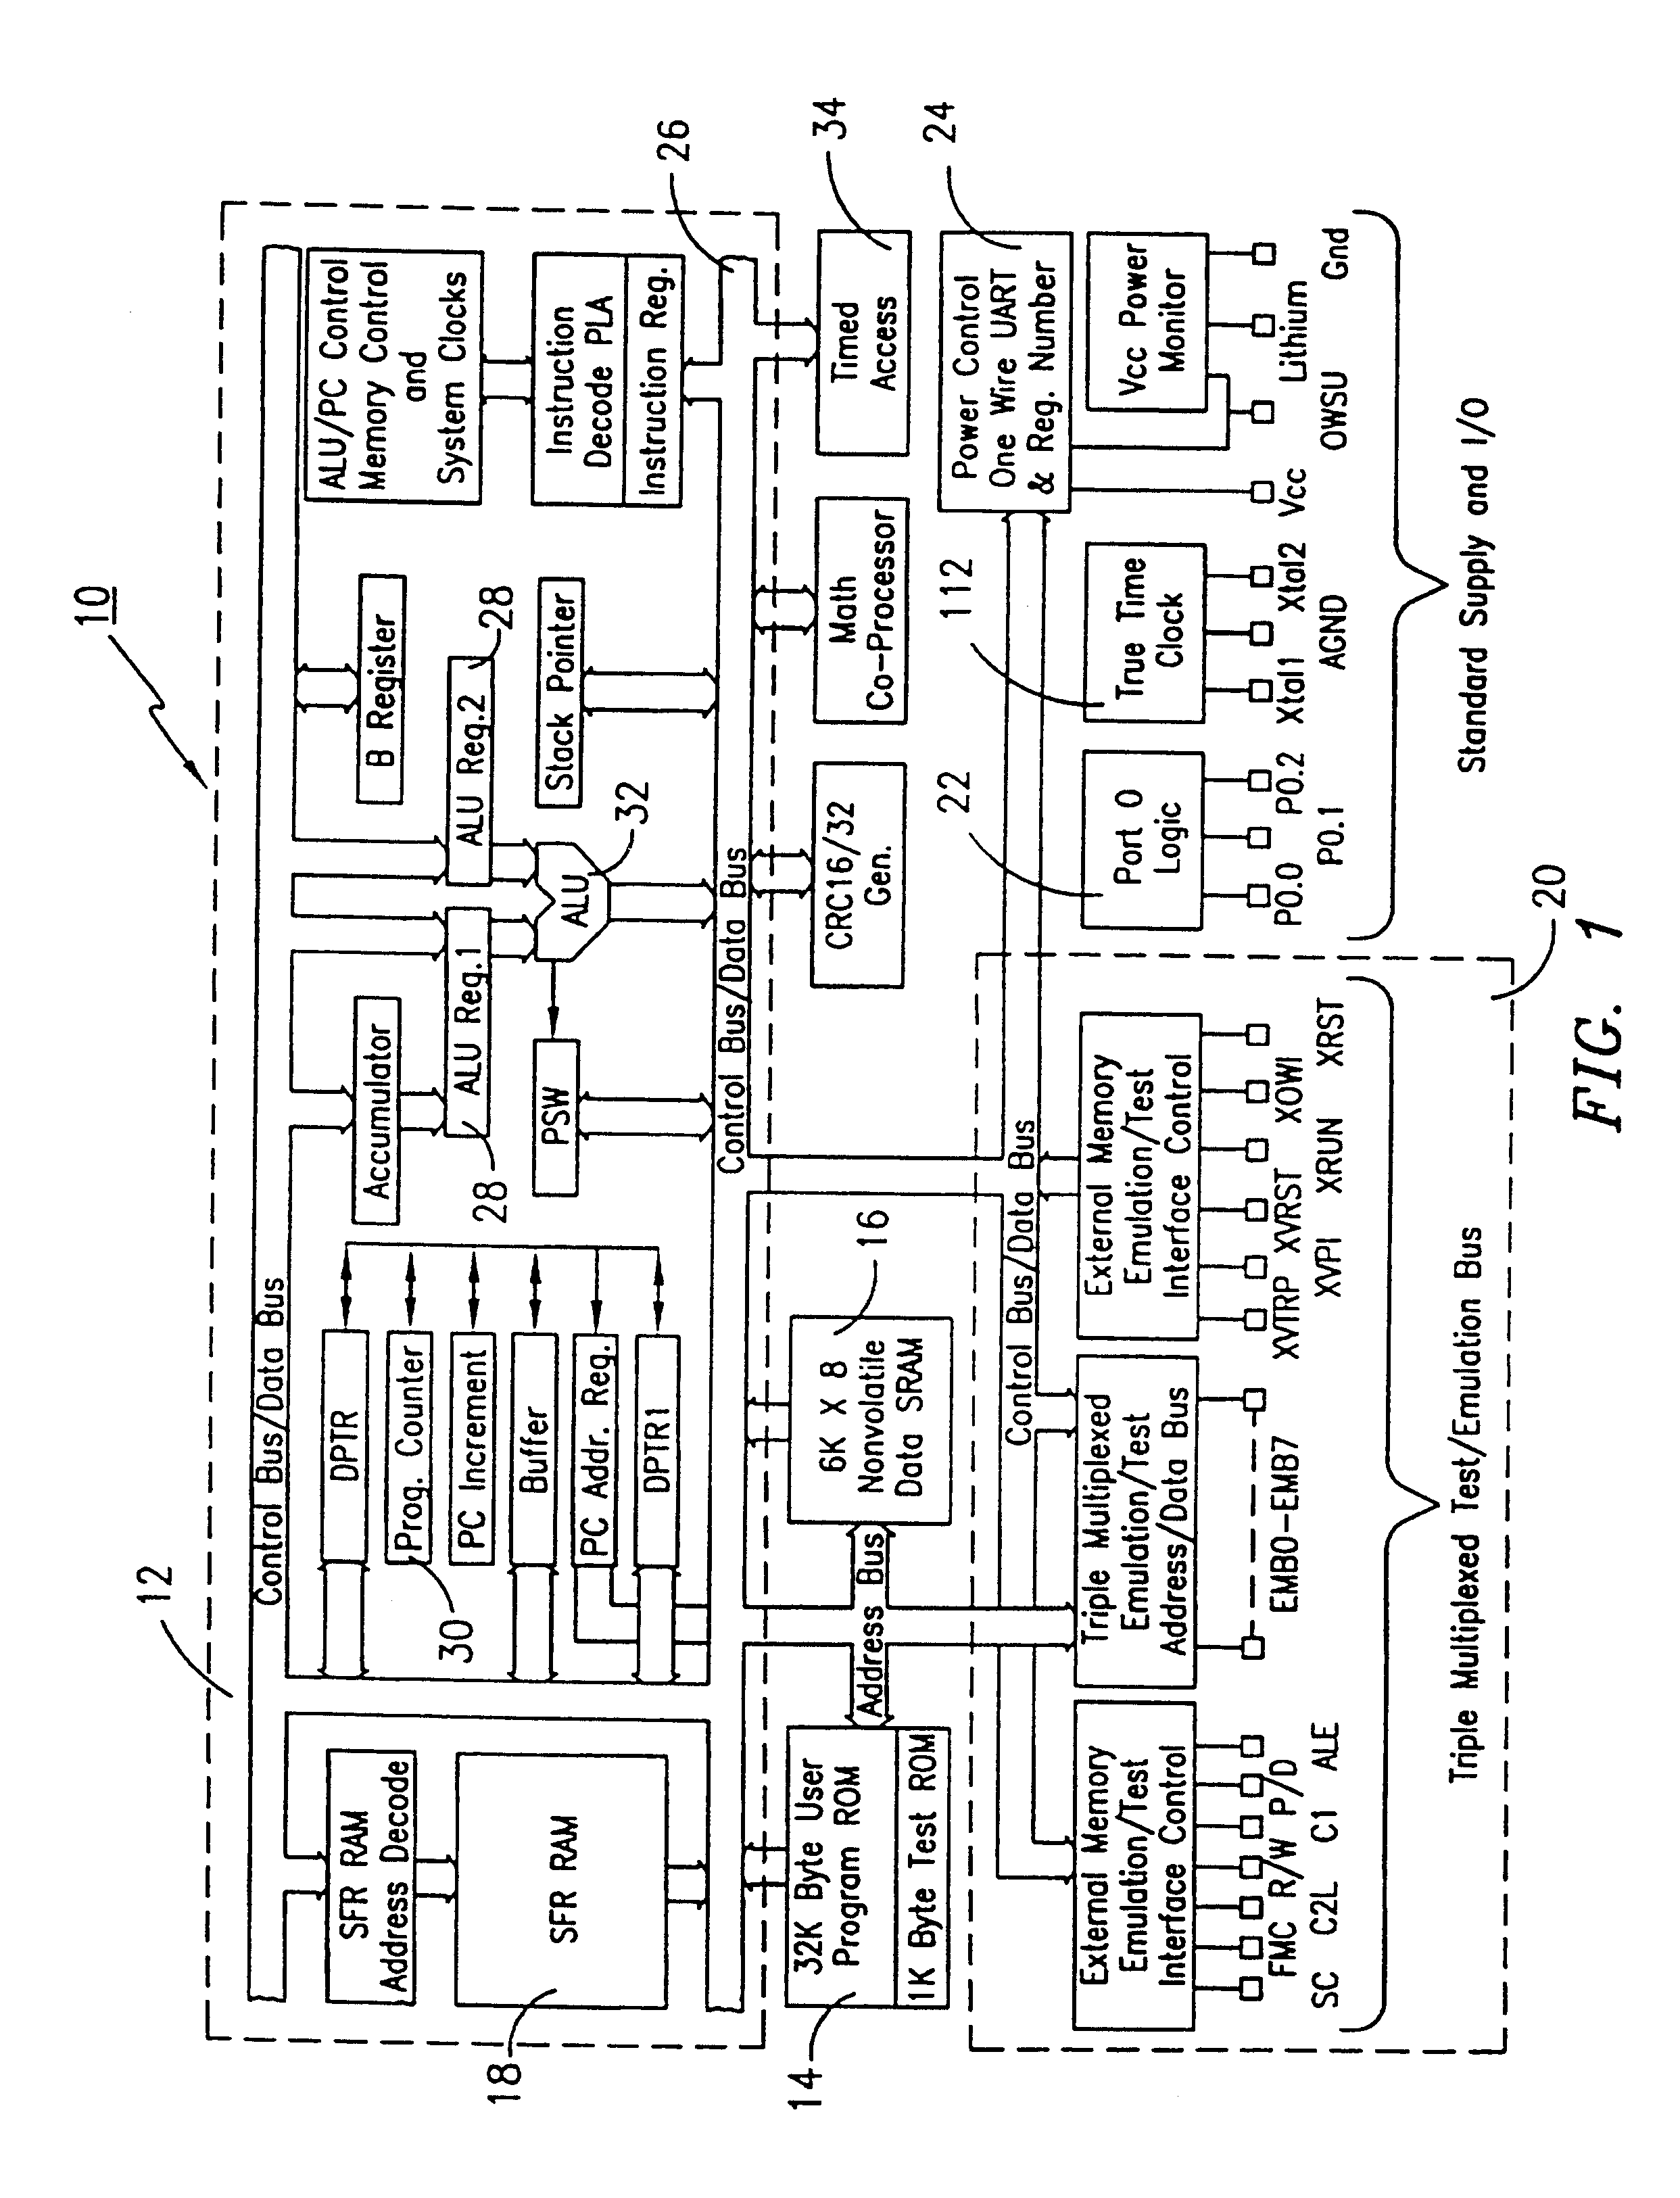 Parasitically powered microprocessor capable of transmitting data over a single data line and ground